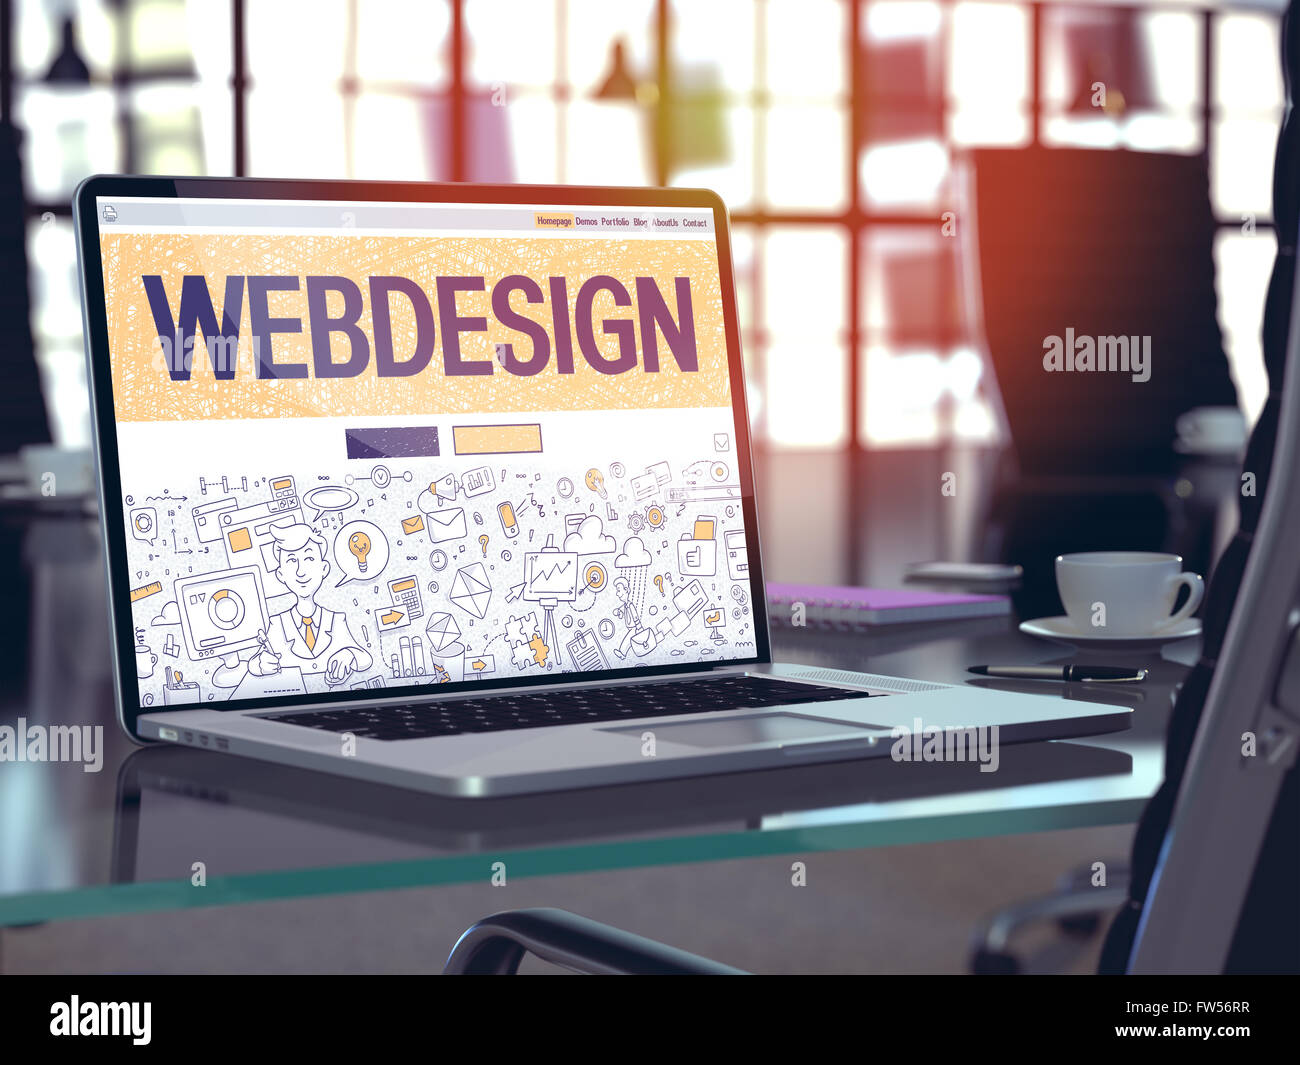 Webdesign on Laptop in Modern Workplace Background. Stock Photo